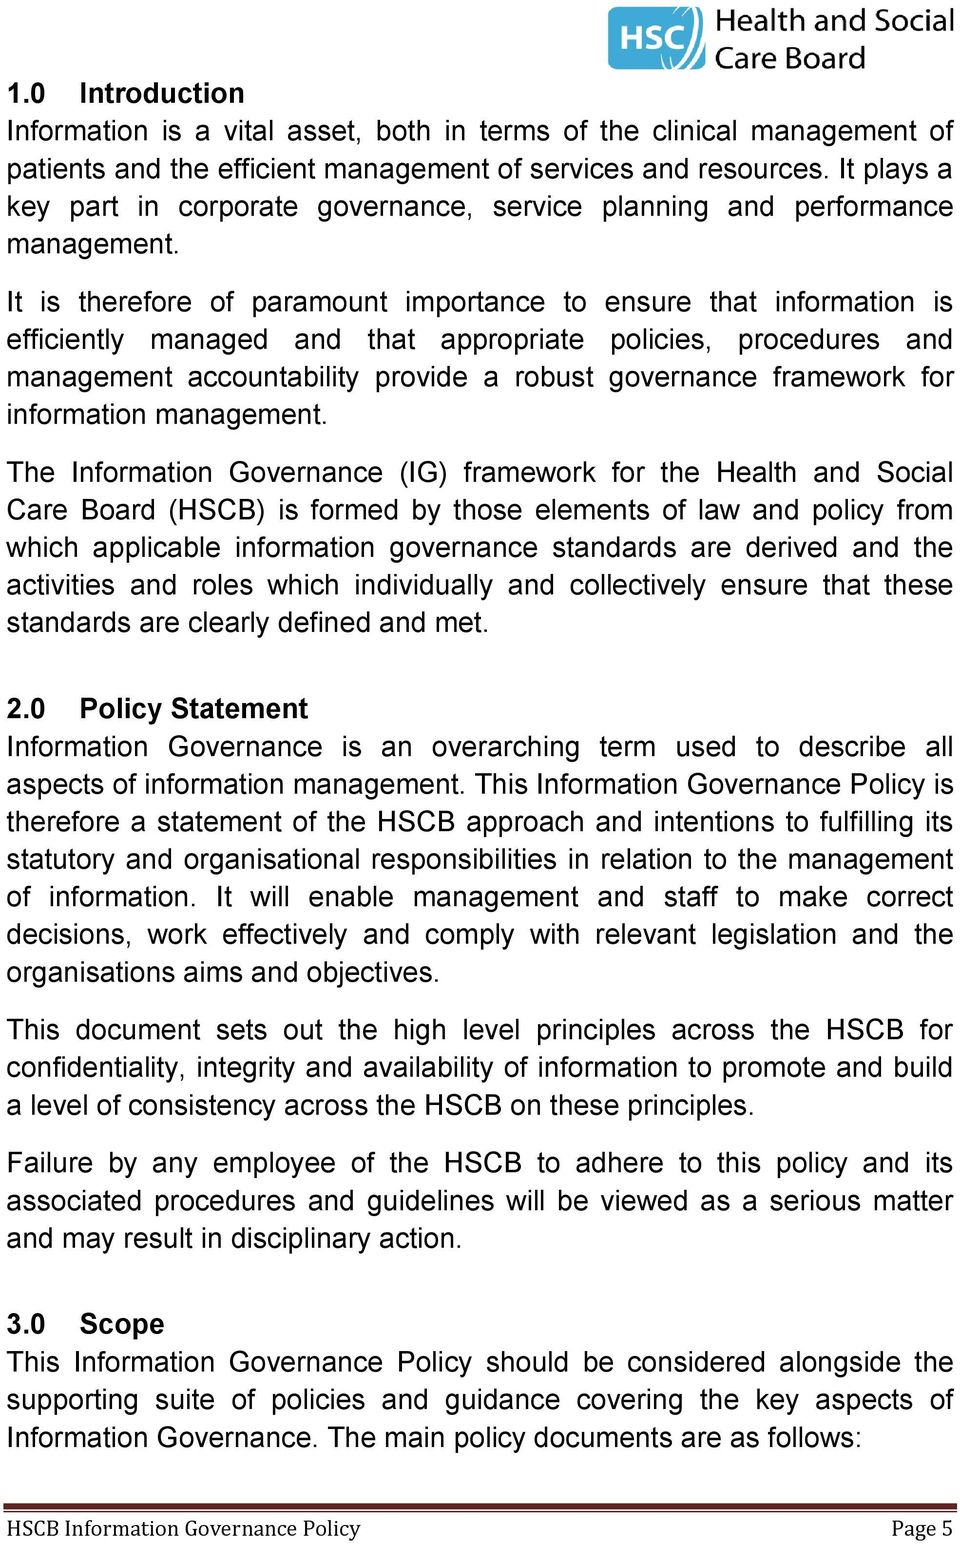 It is therefore of paramount importance to ensure that information is efficiently managed and that appropriate policies, procedures and management accountability provide a robust governance framework